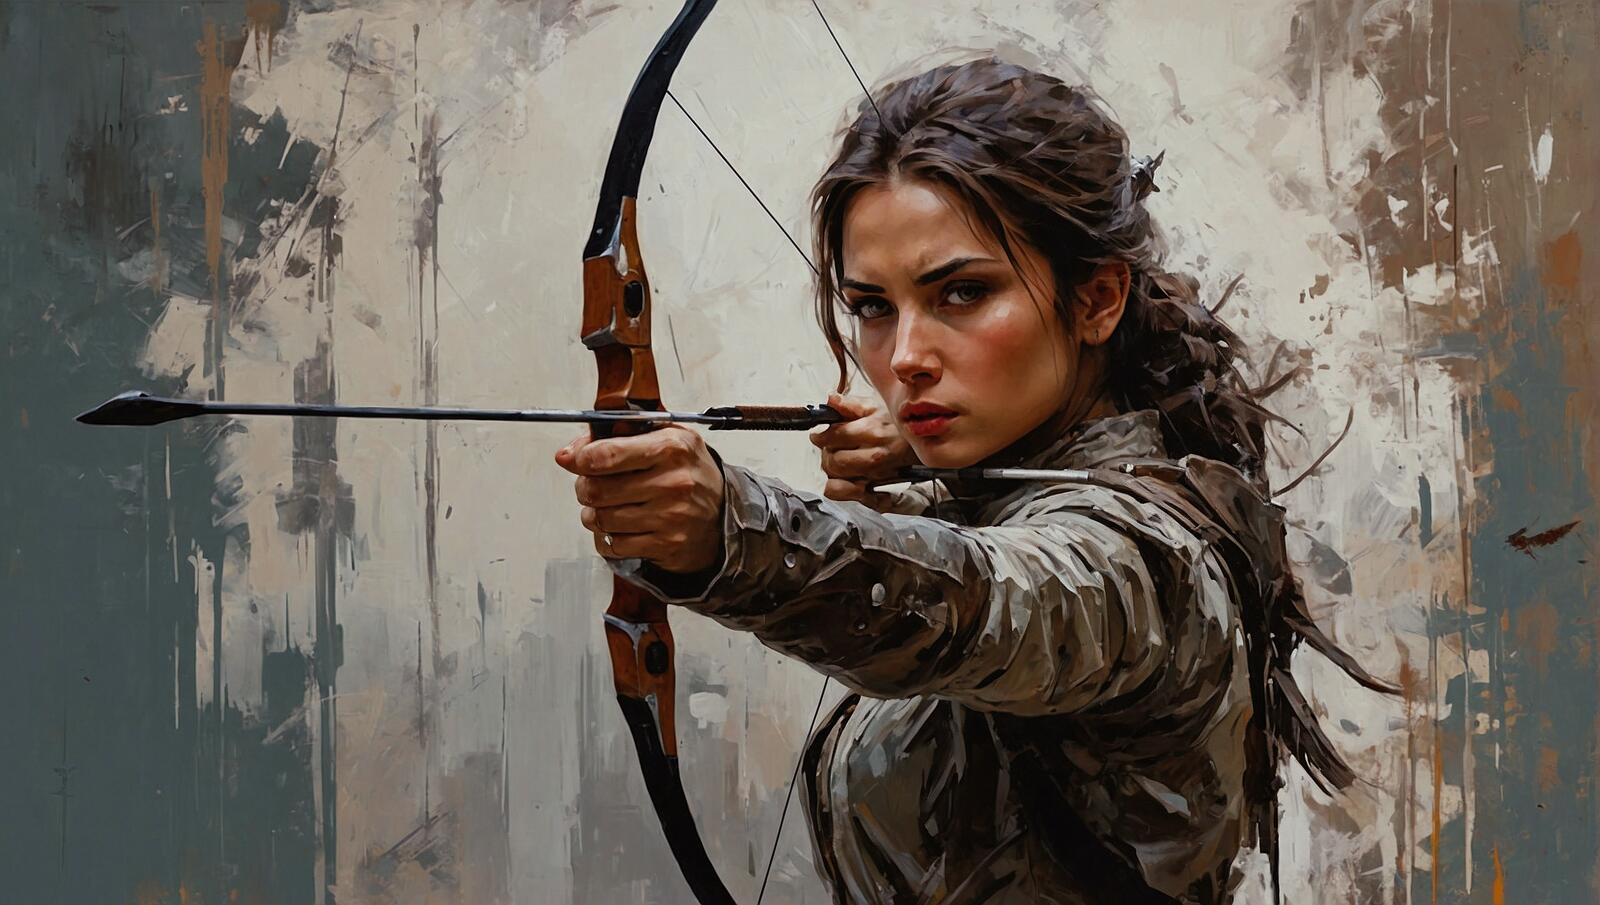 Free photo A painting of a woman aiming a bow with a knife in one hand and an arrow to the other